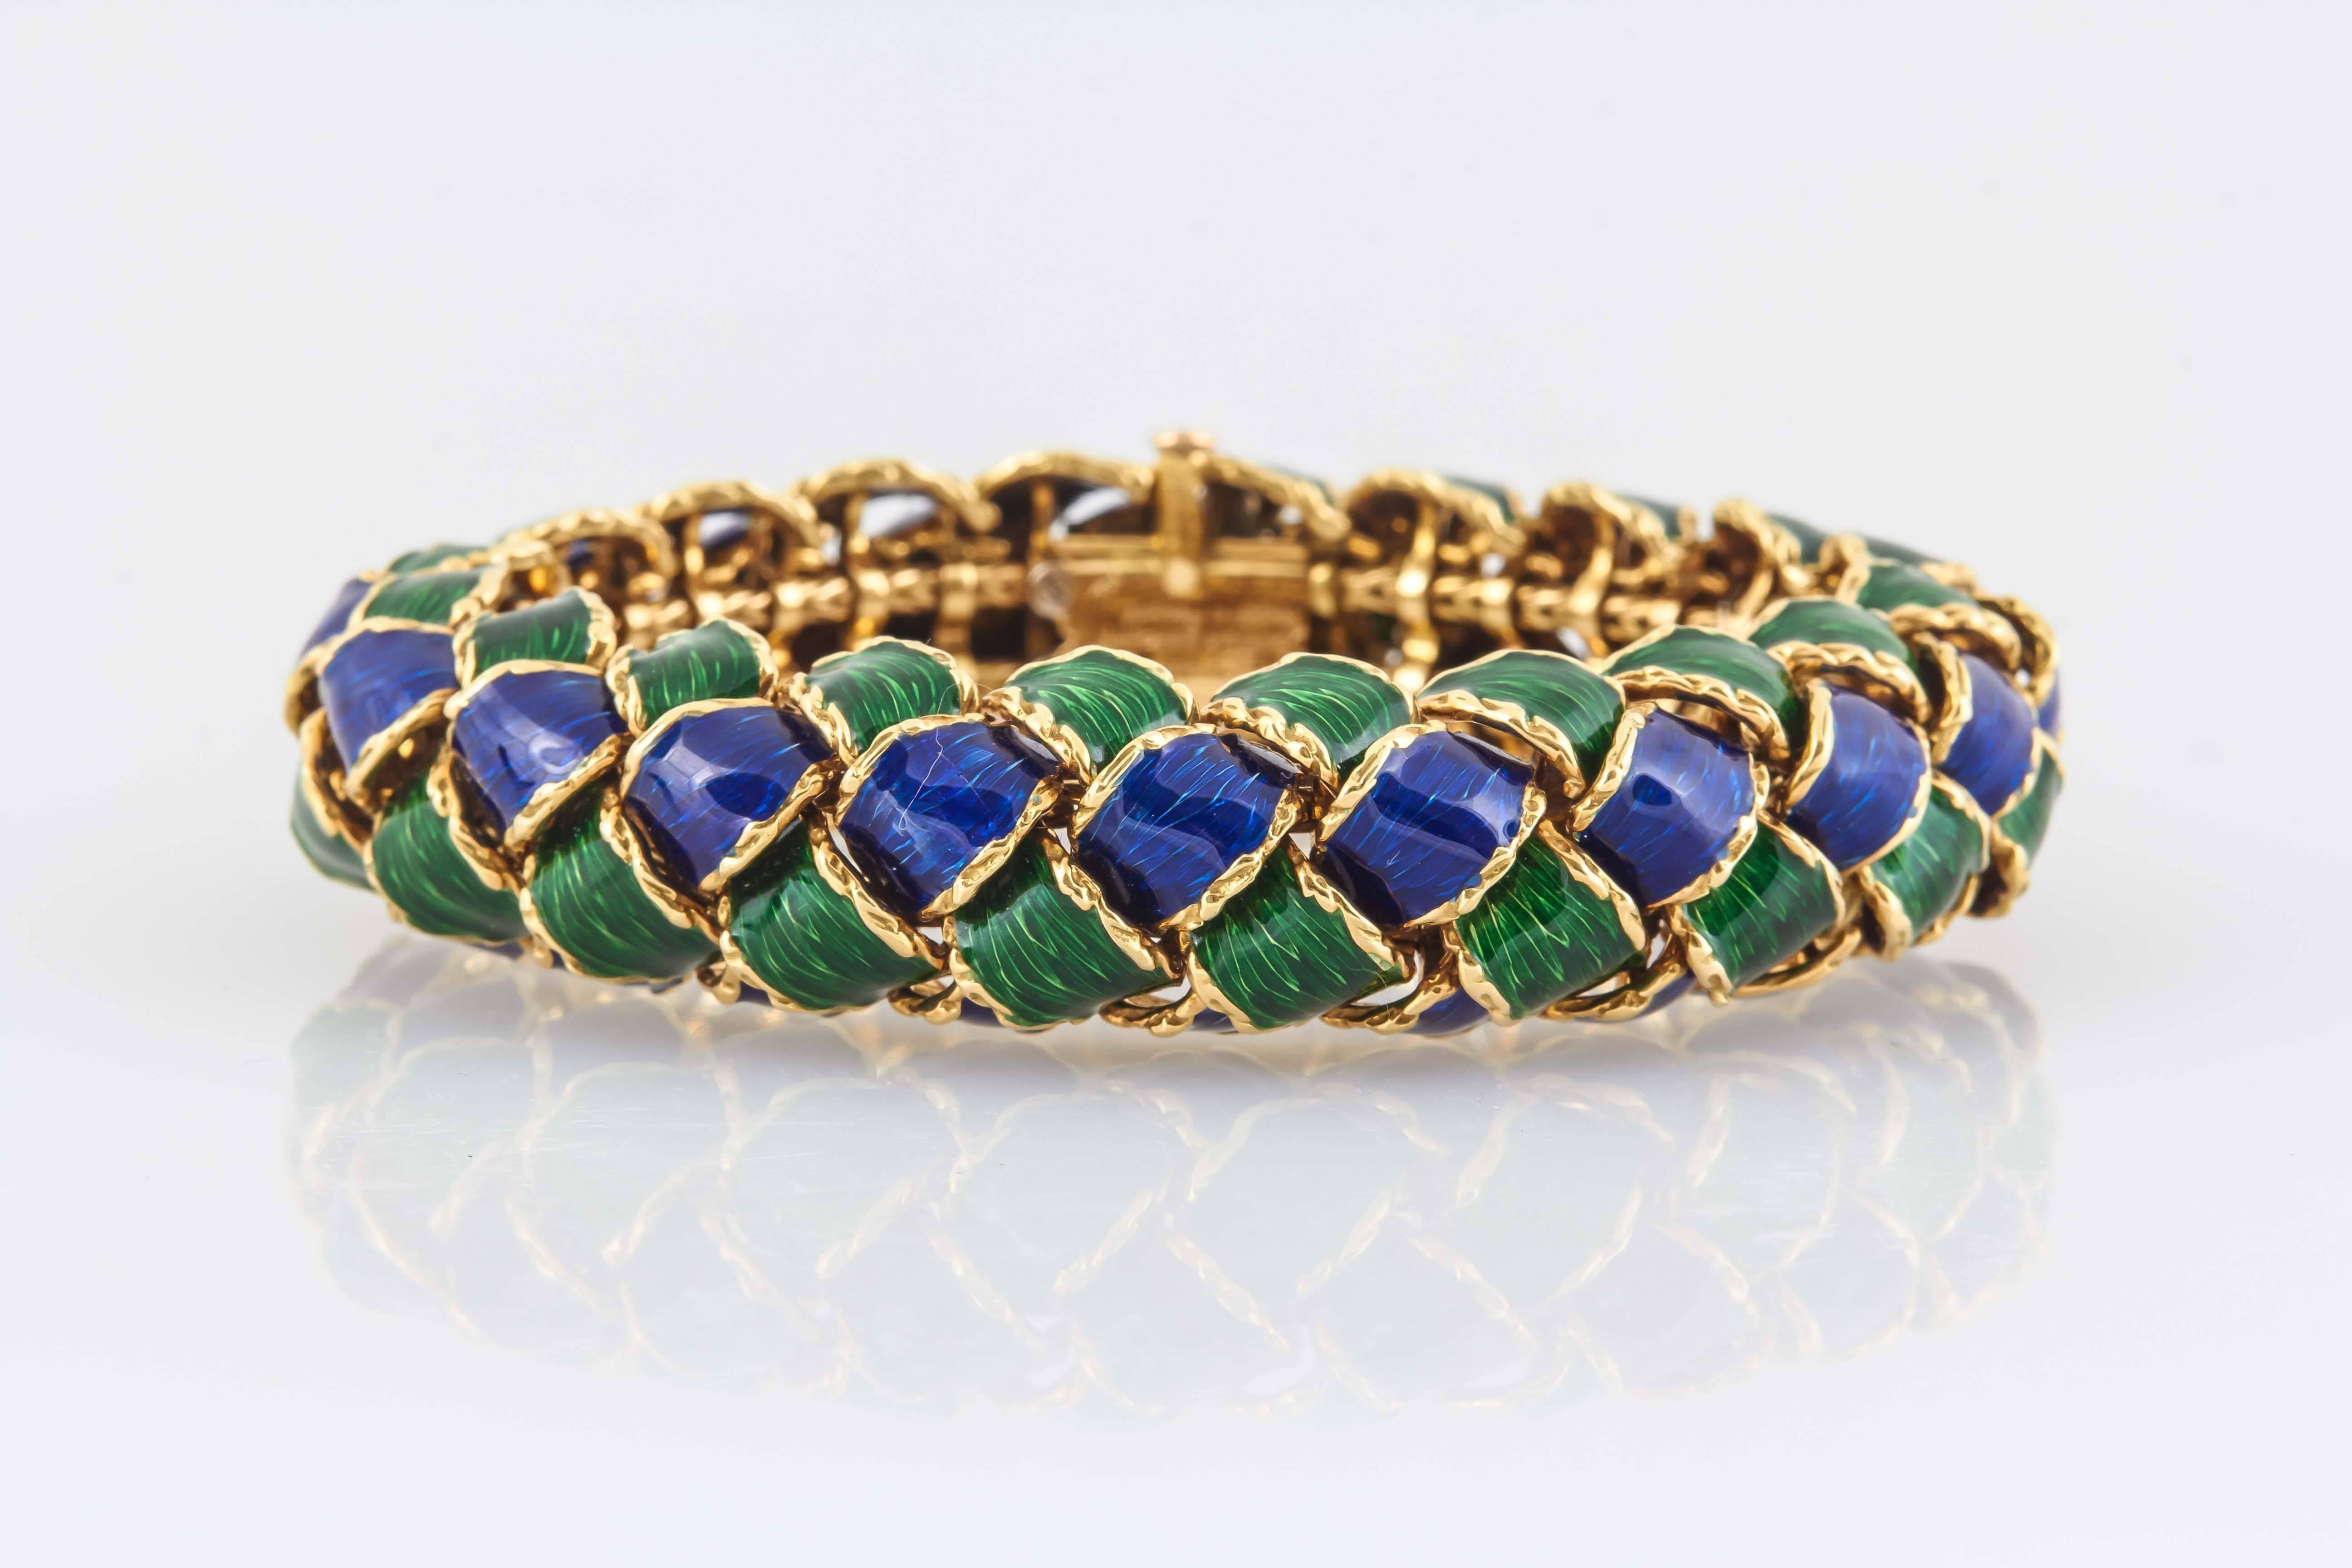 Beautiful Schlumberger bracelet finely crafted in 18k yellow gold, with a beautiful green and blue enamel, signed by Schlumberger
